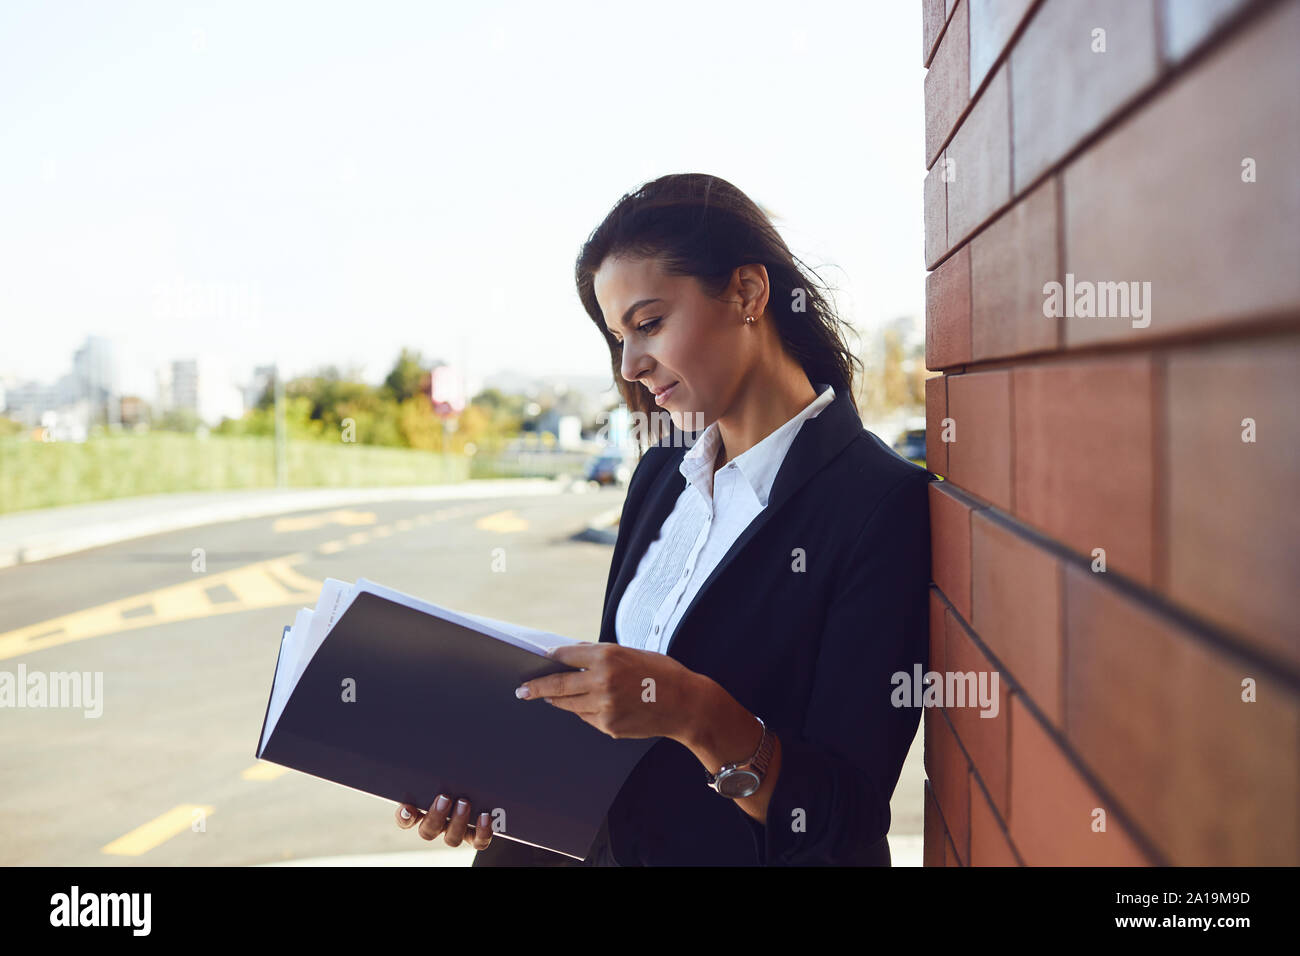 Serious businesswoman is reading documents while standing outdoors. Stock Photo